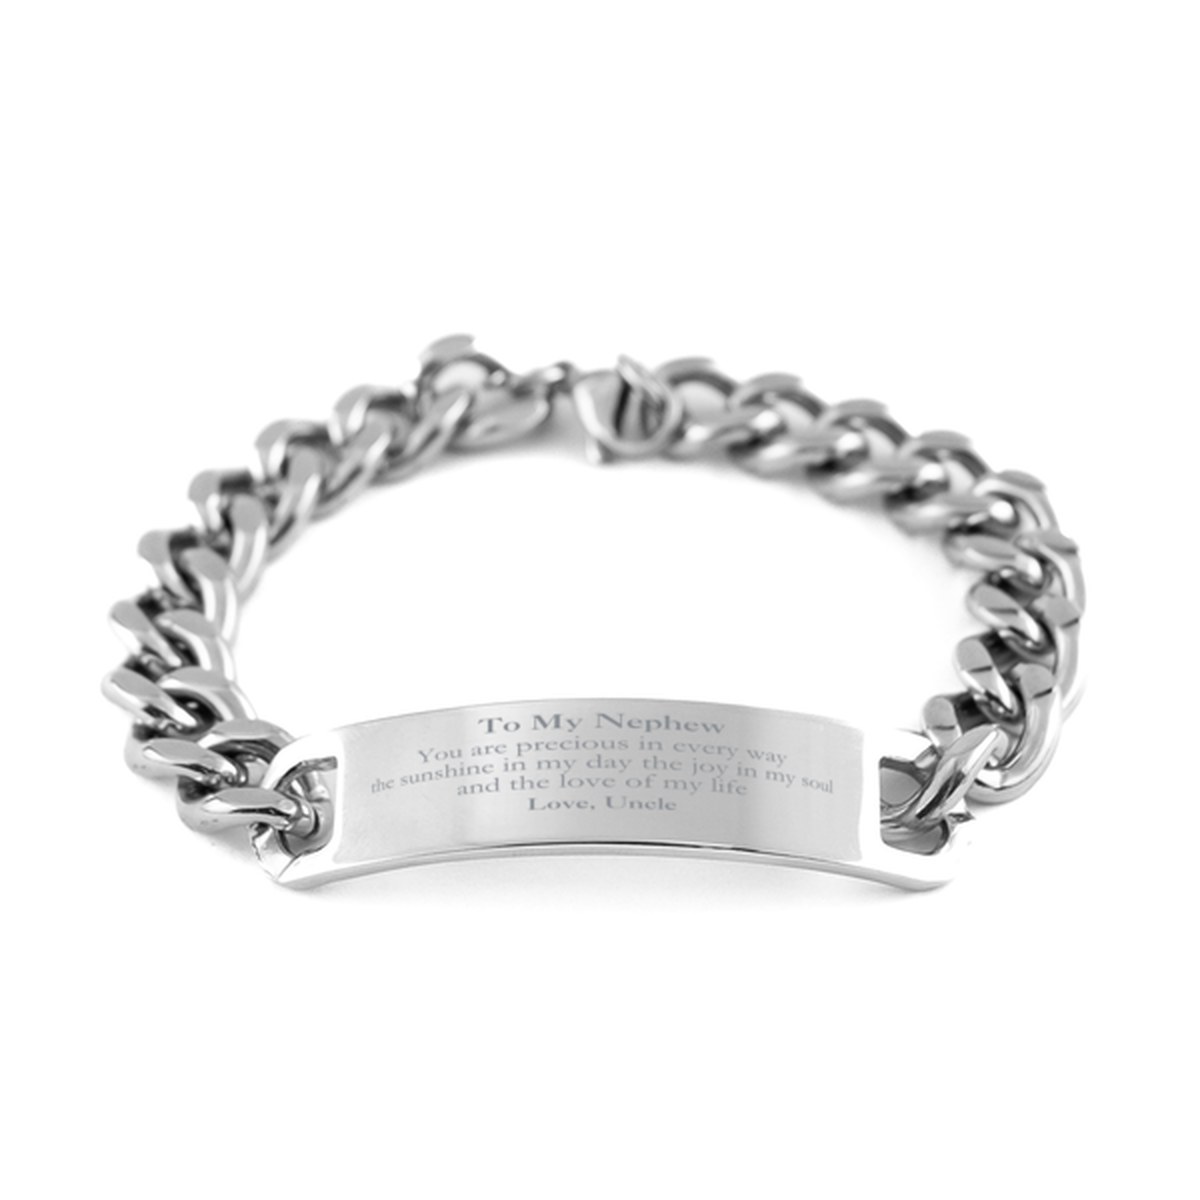 Graduation Gifts for Nephew Cuban Chain Stainless Steel Bracelet Present from Uncle, Christmas Nephew Birthday Gifts Nephew You are precious in every way the sunshine in my day. Love, Uncle